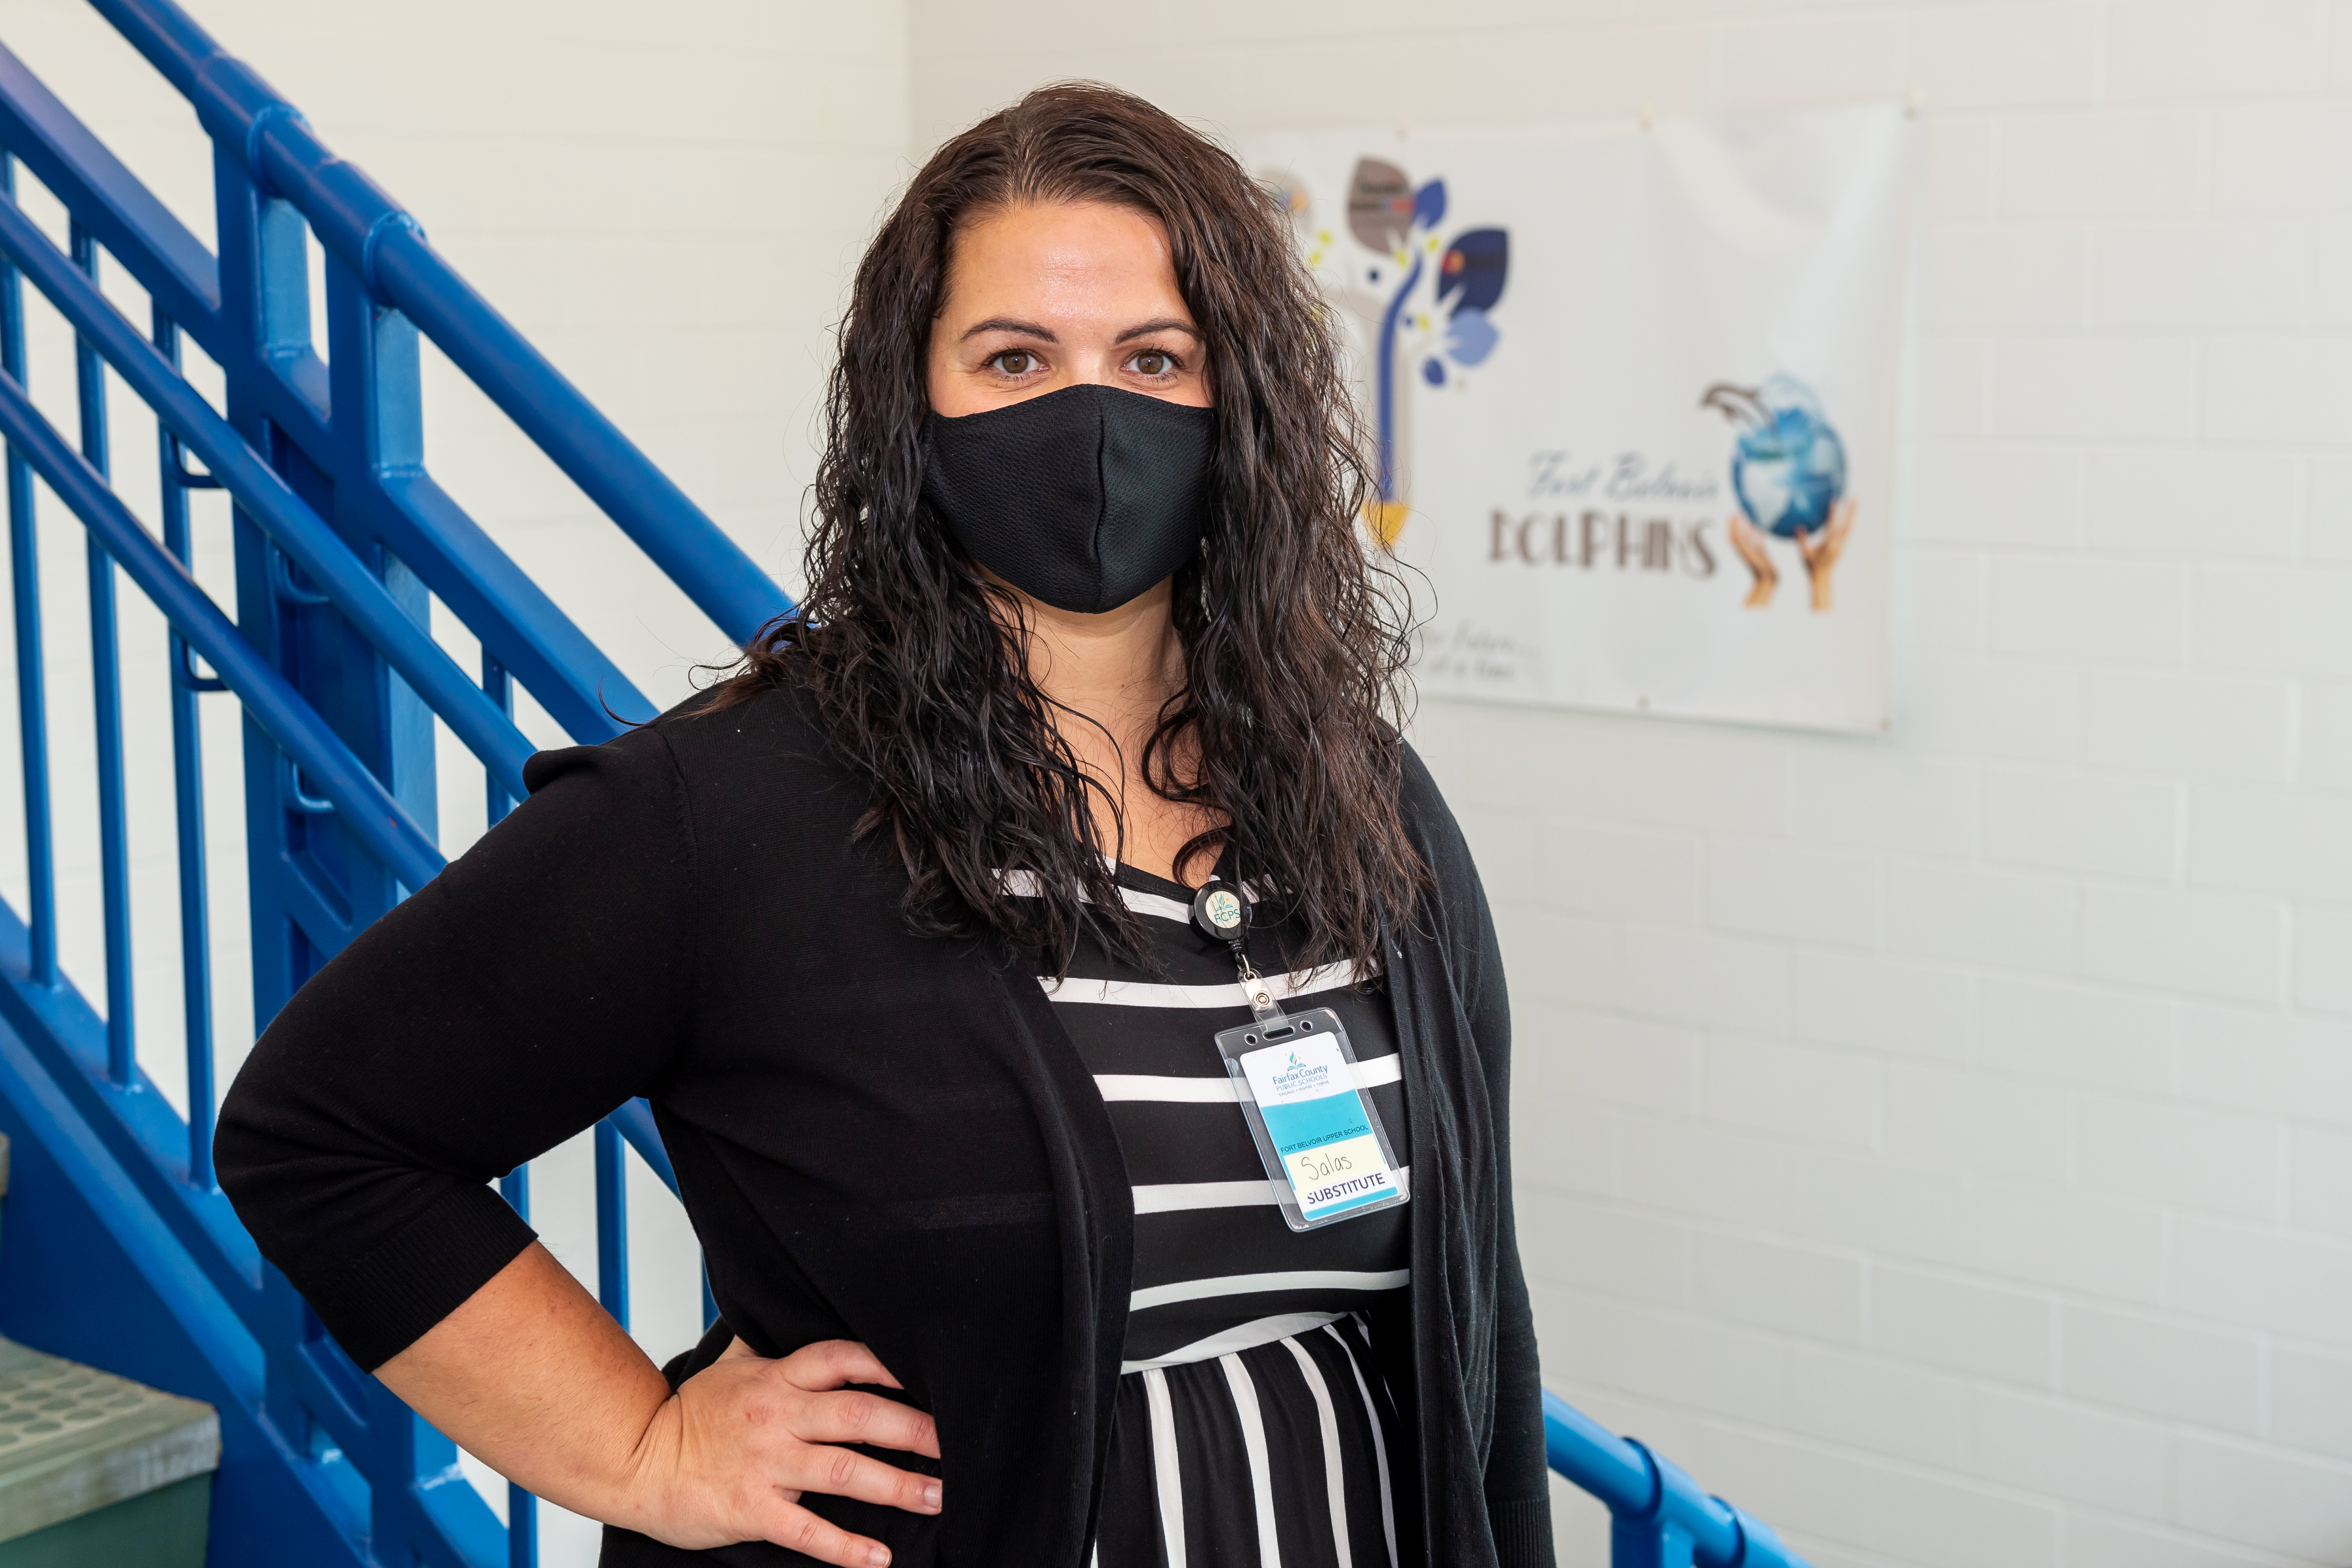 FCPS Substitute Ashley Salas, a military spouse and freelance photographer, began substituting at Fort Belvoir ES this year when she became aware of the significant need for substitute teachers.